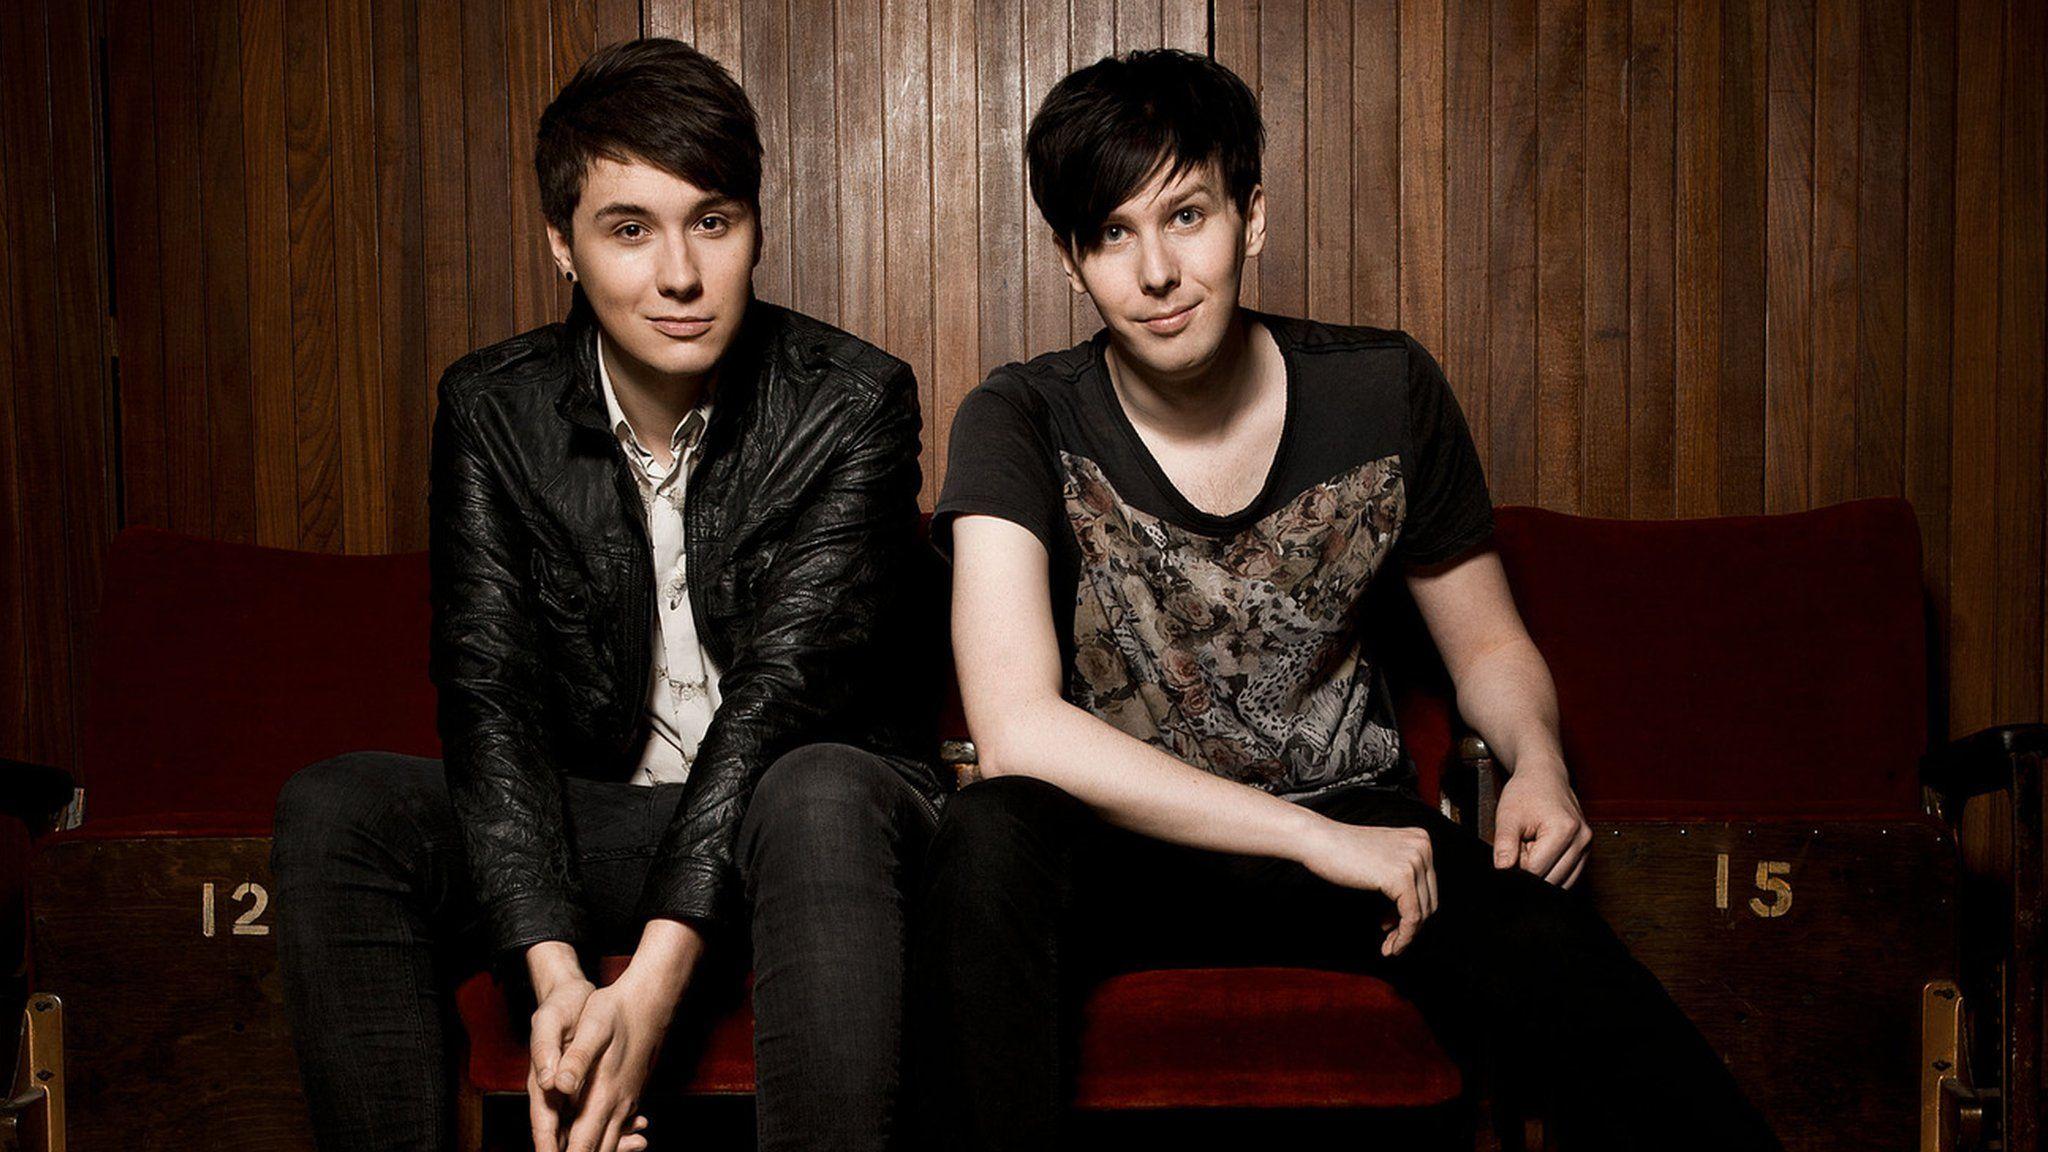 Dan and Phil to present Brit Awards 2015 red carpet. Words